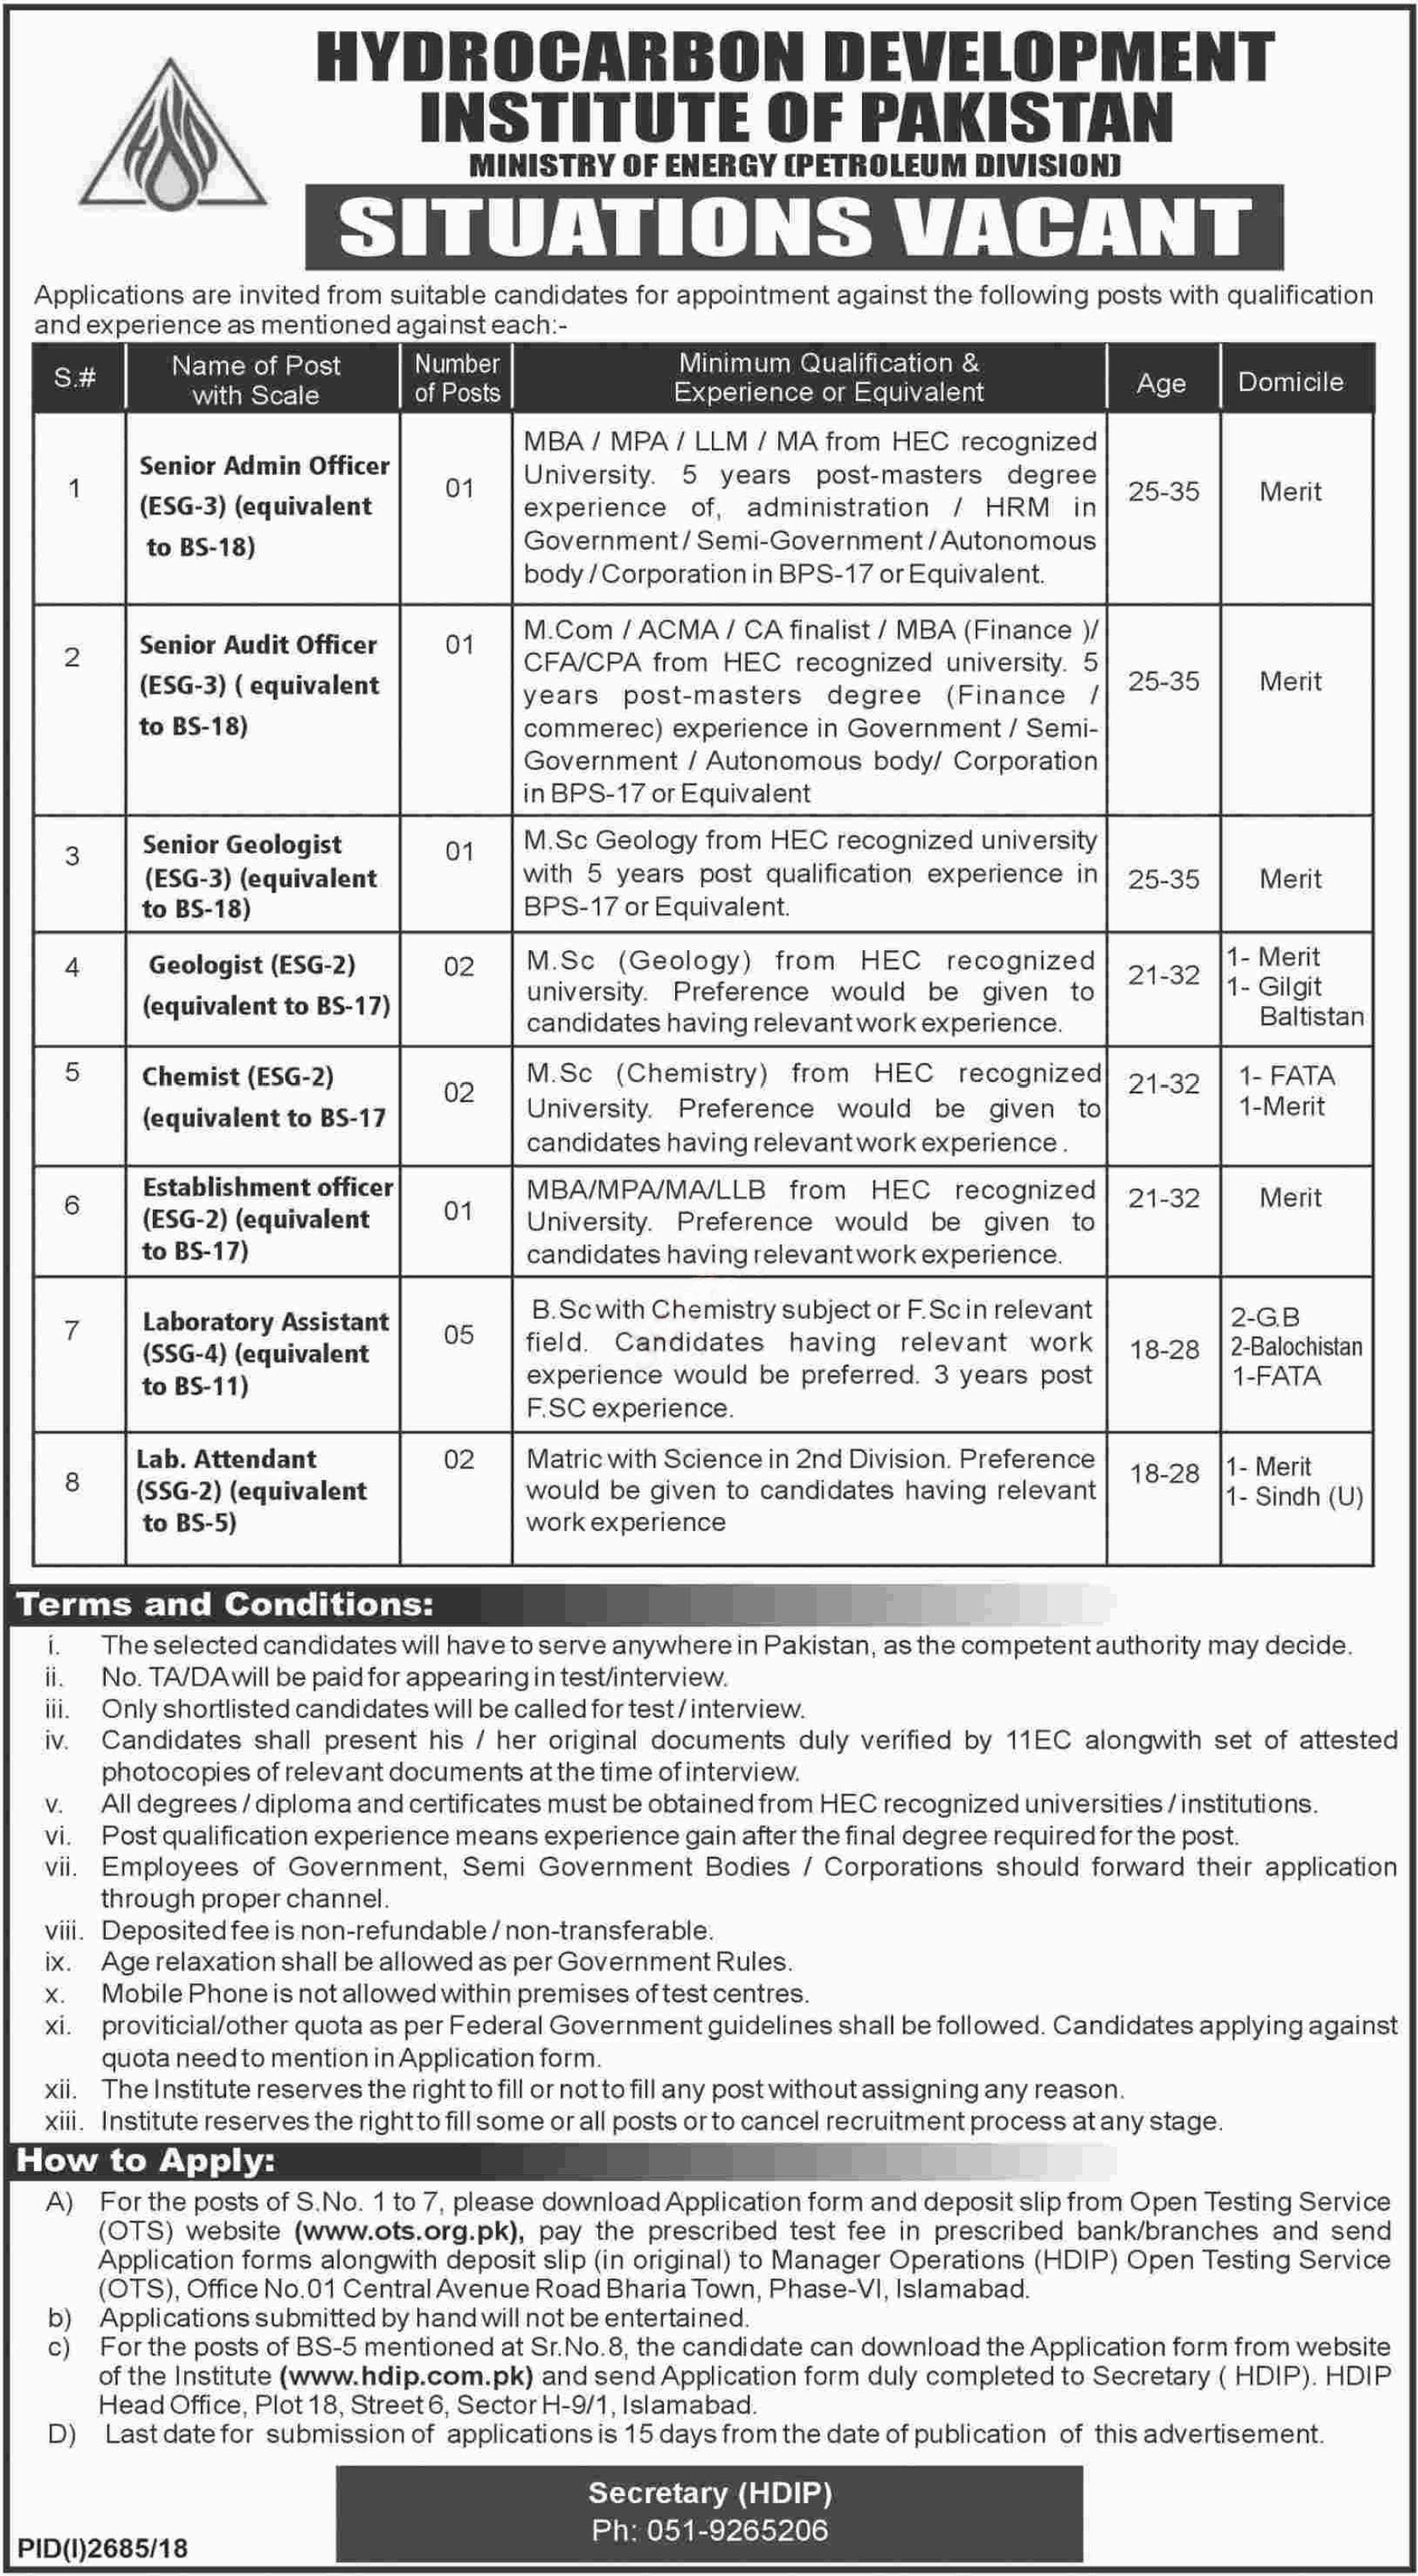 Ministry of Energy Petroleum division Jobs 2019 PTS Application Form